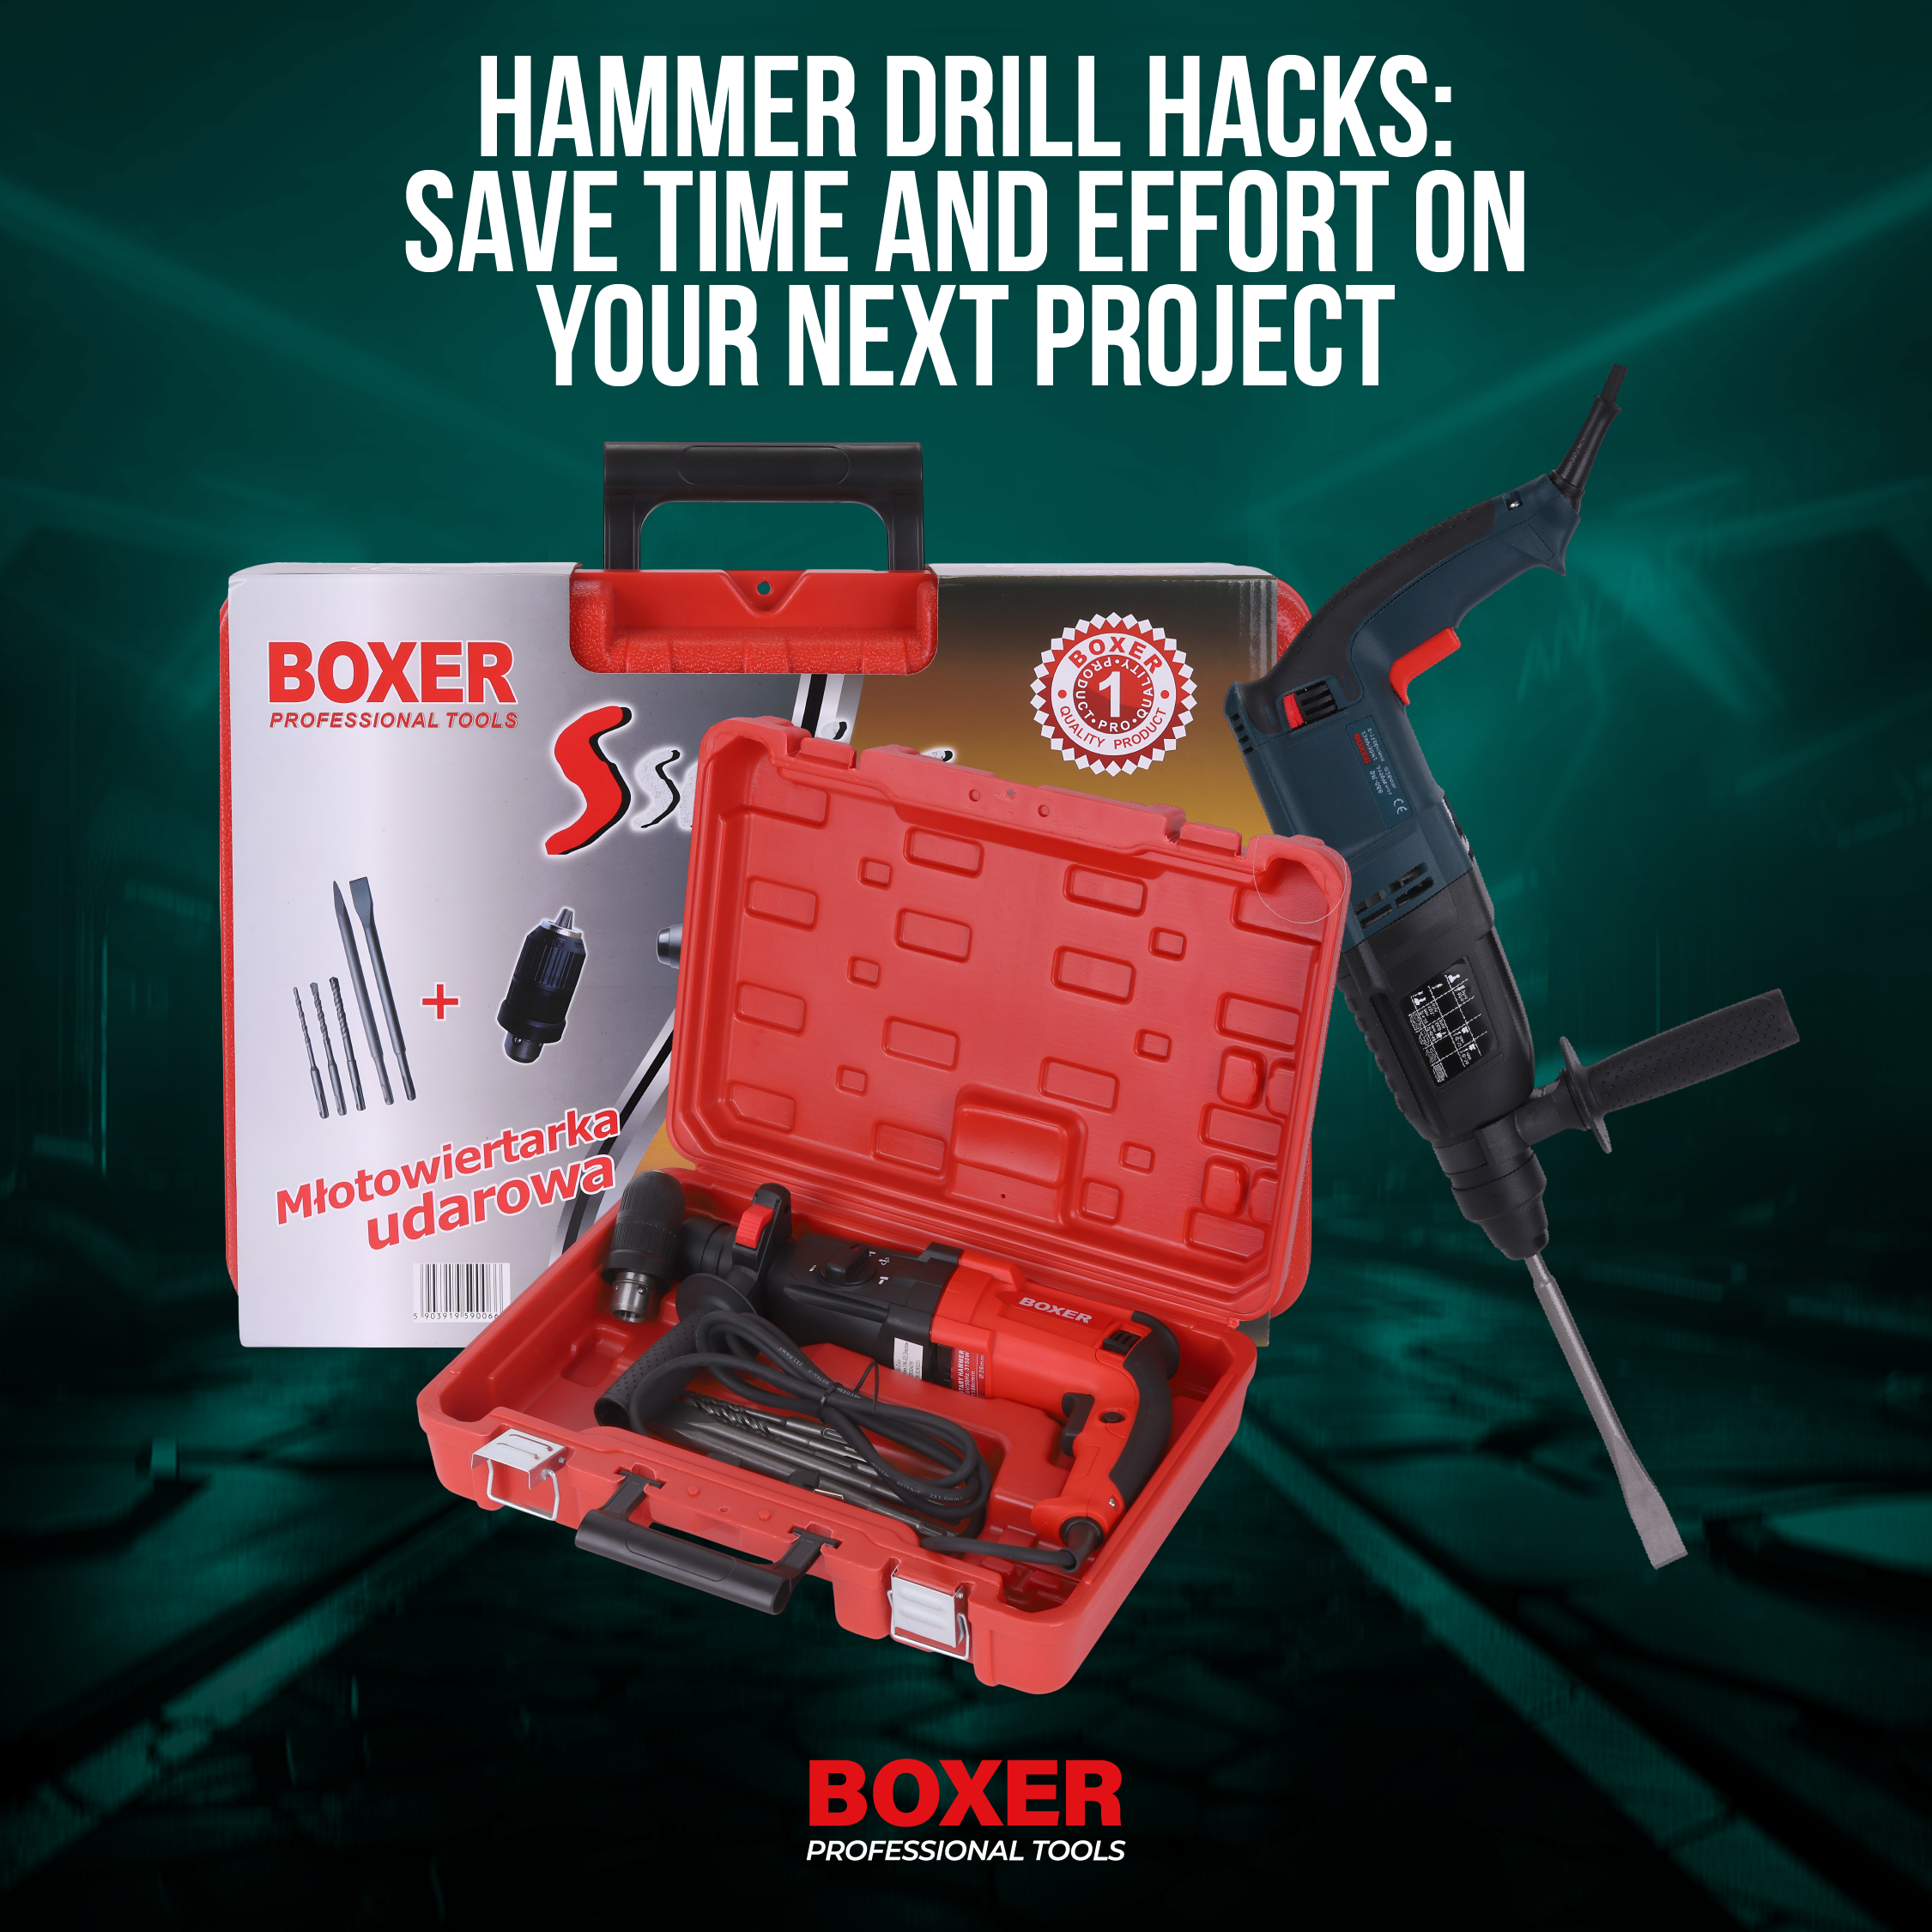 Hammer Drill Hacks: Save Time and Effort on Your Next Project